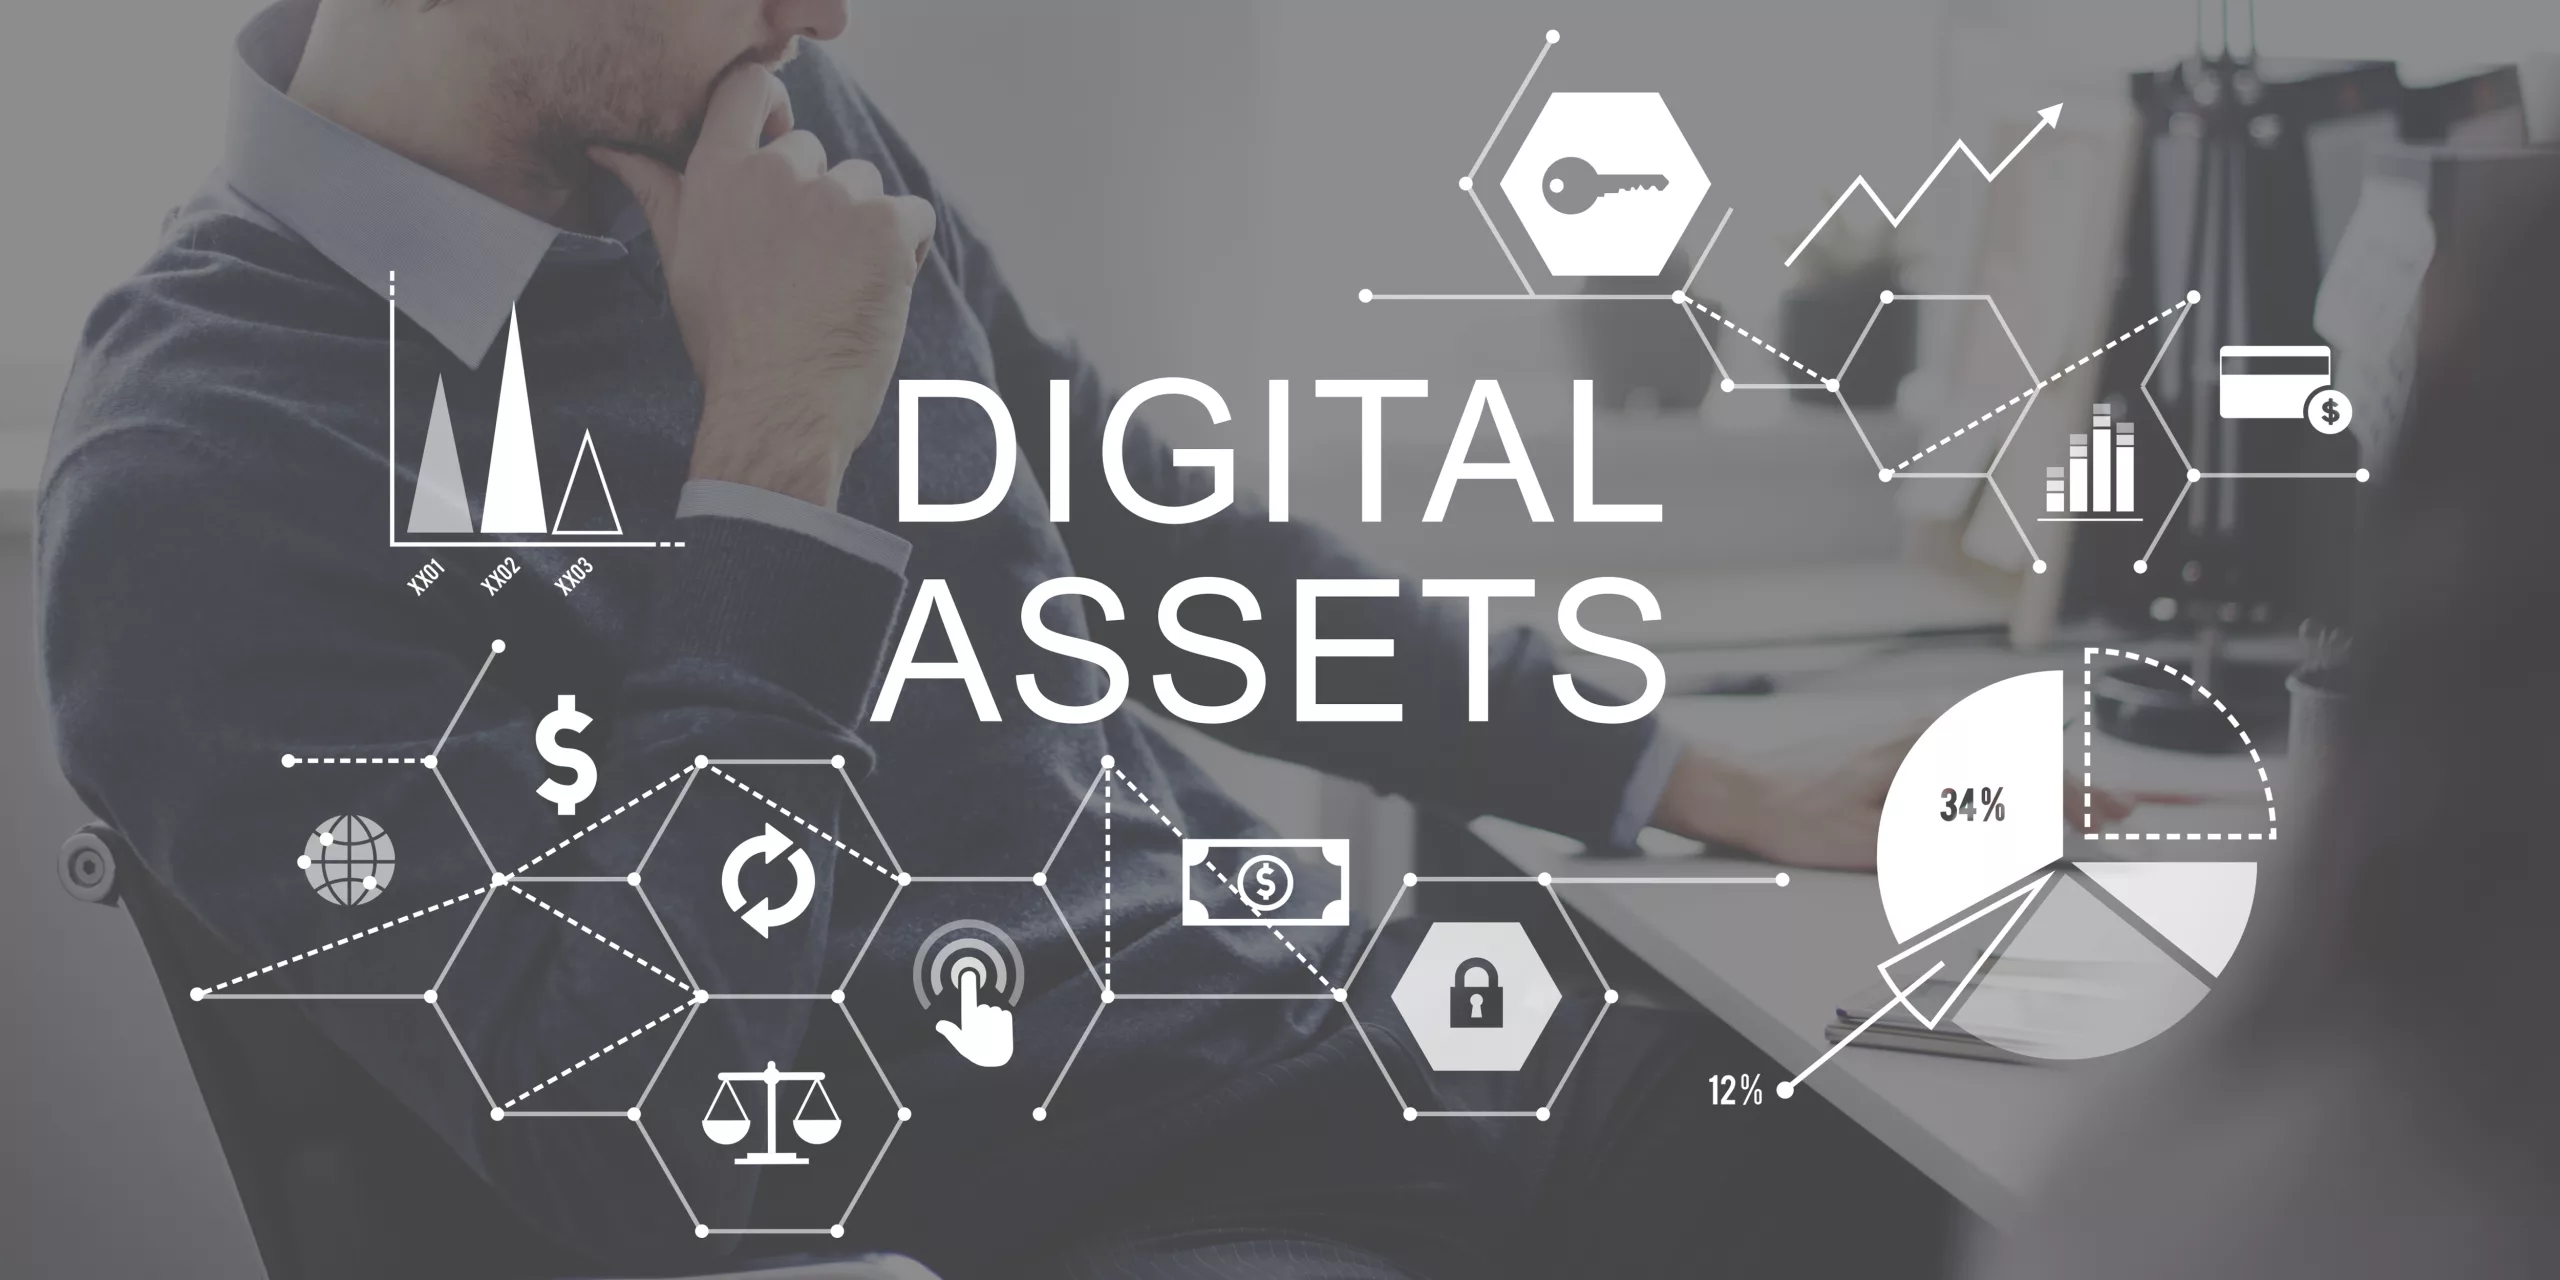 Digital Assets such as crypto